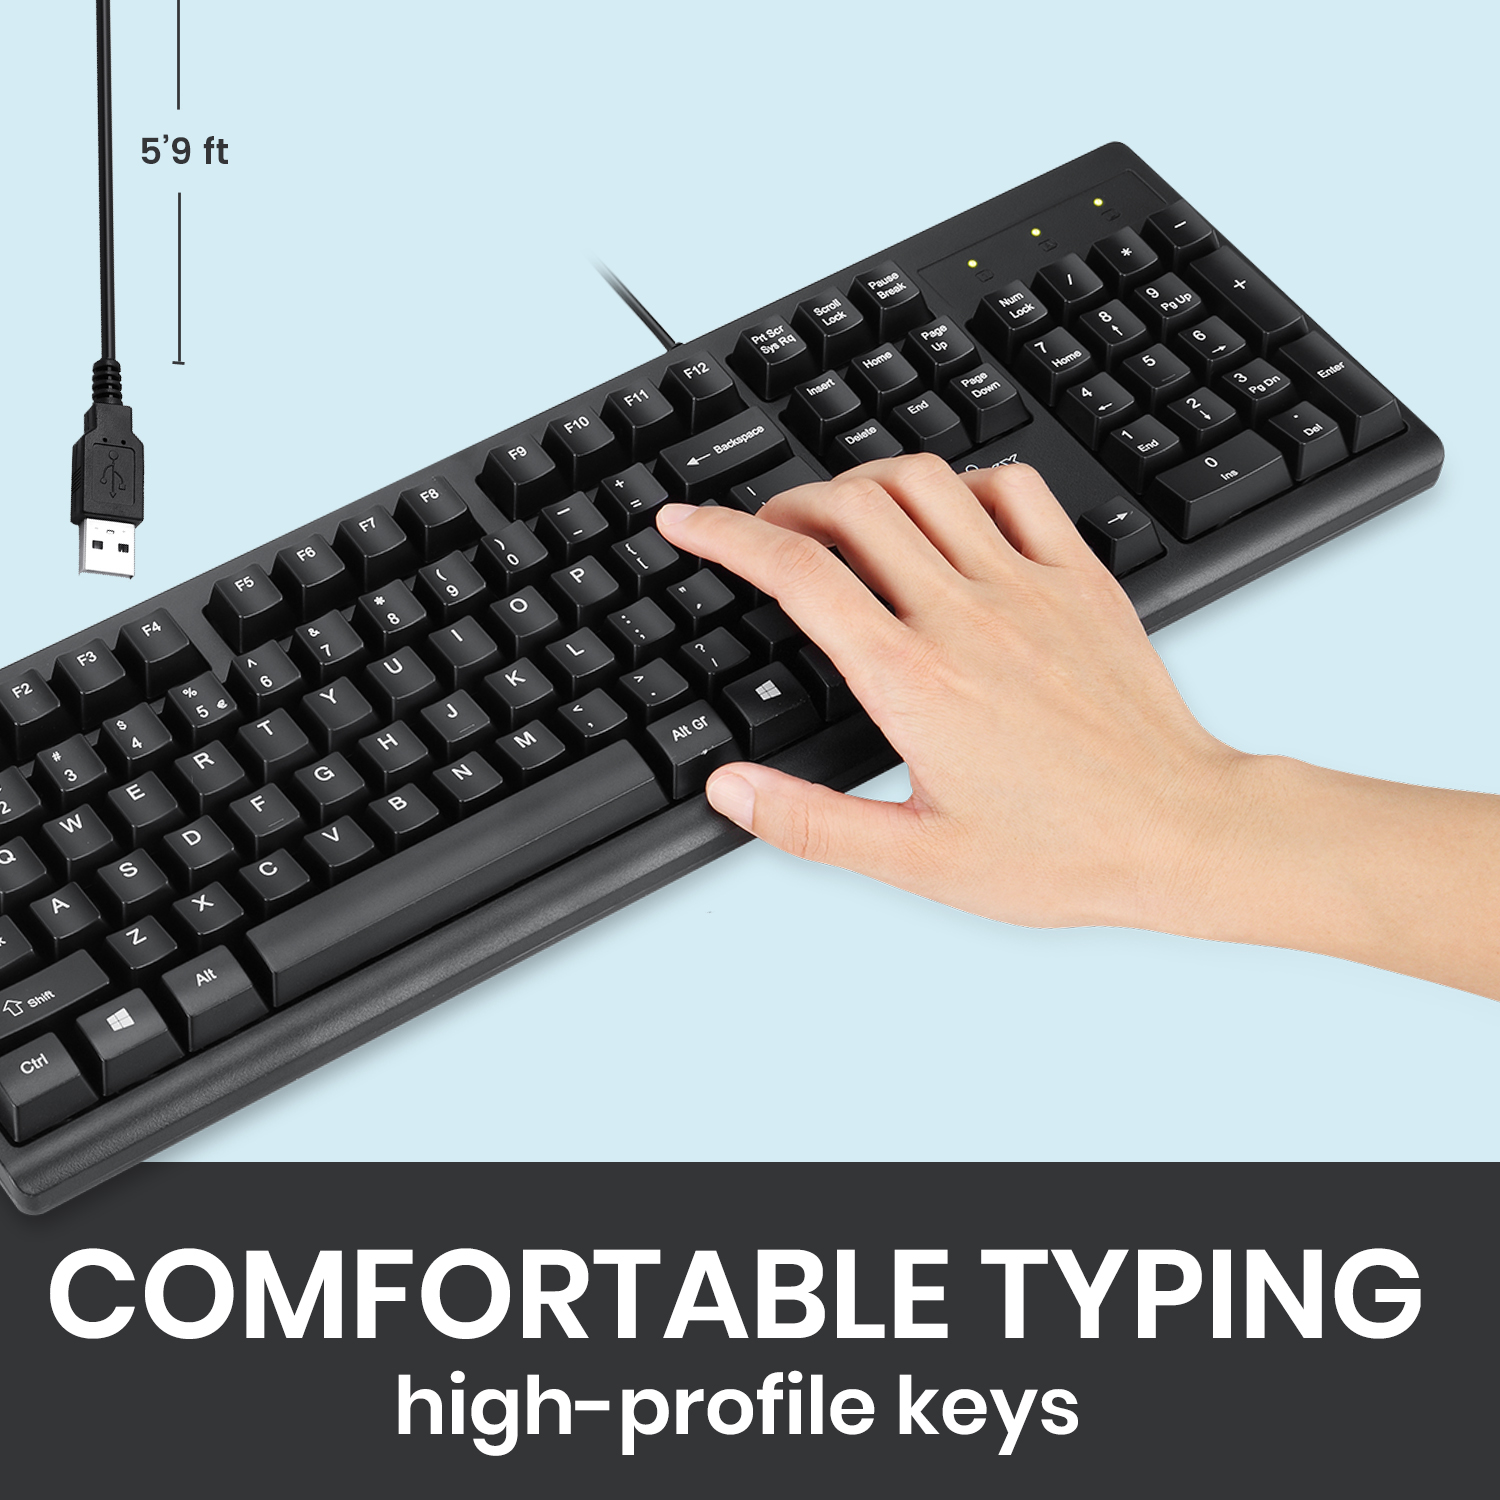  Comfortable typing